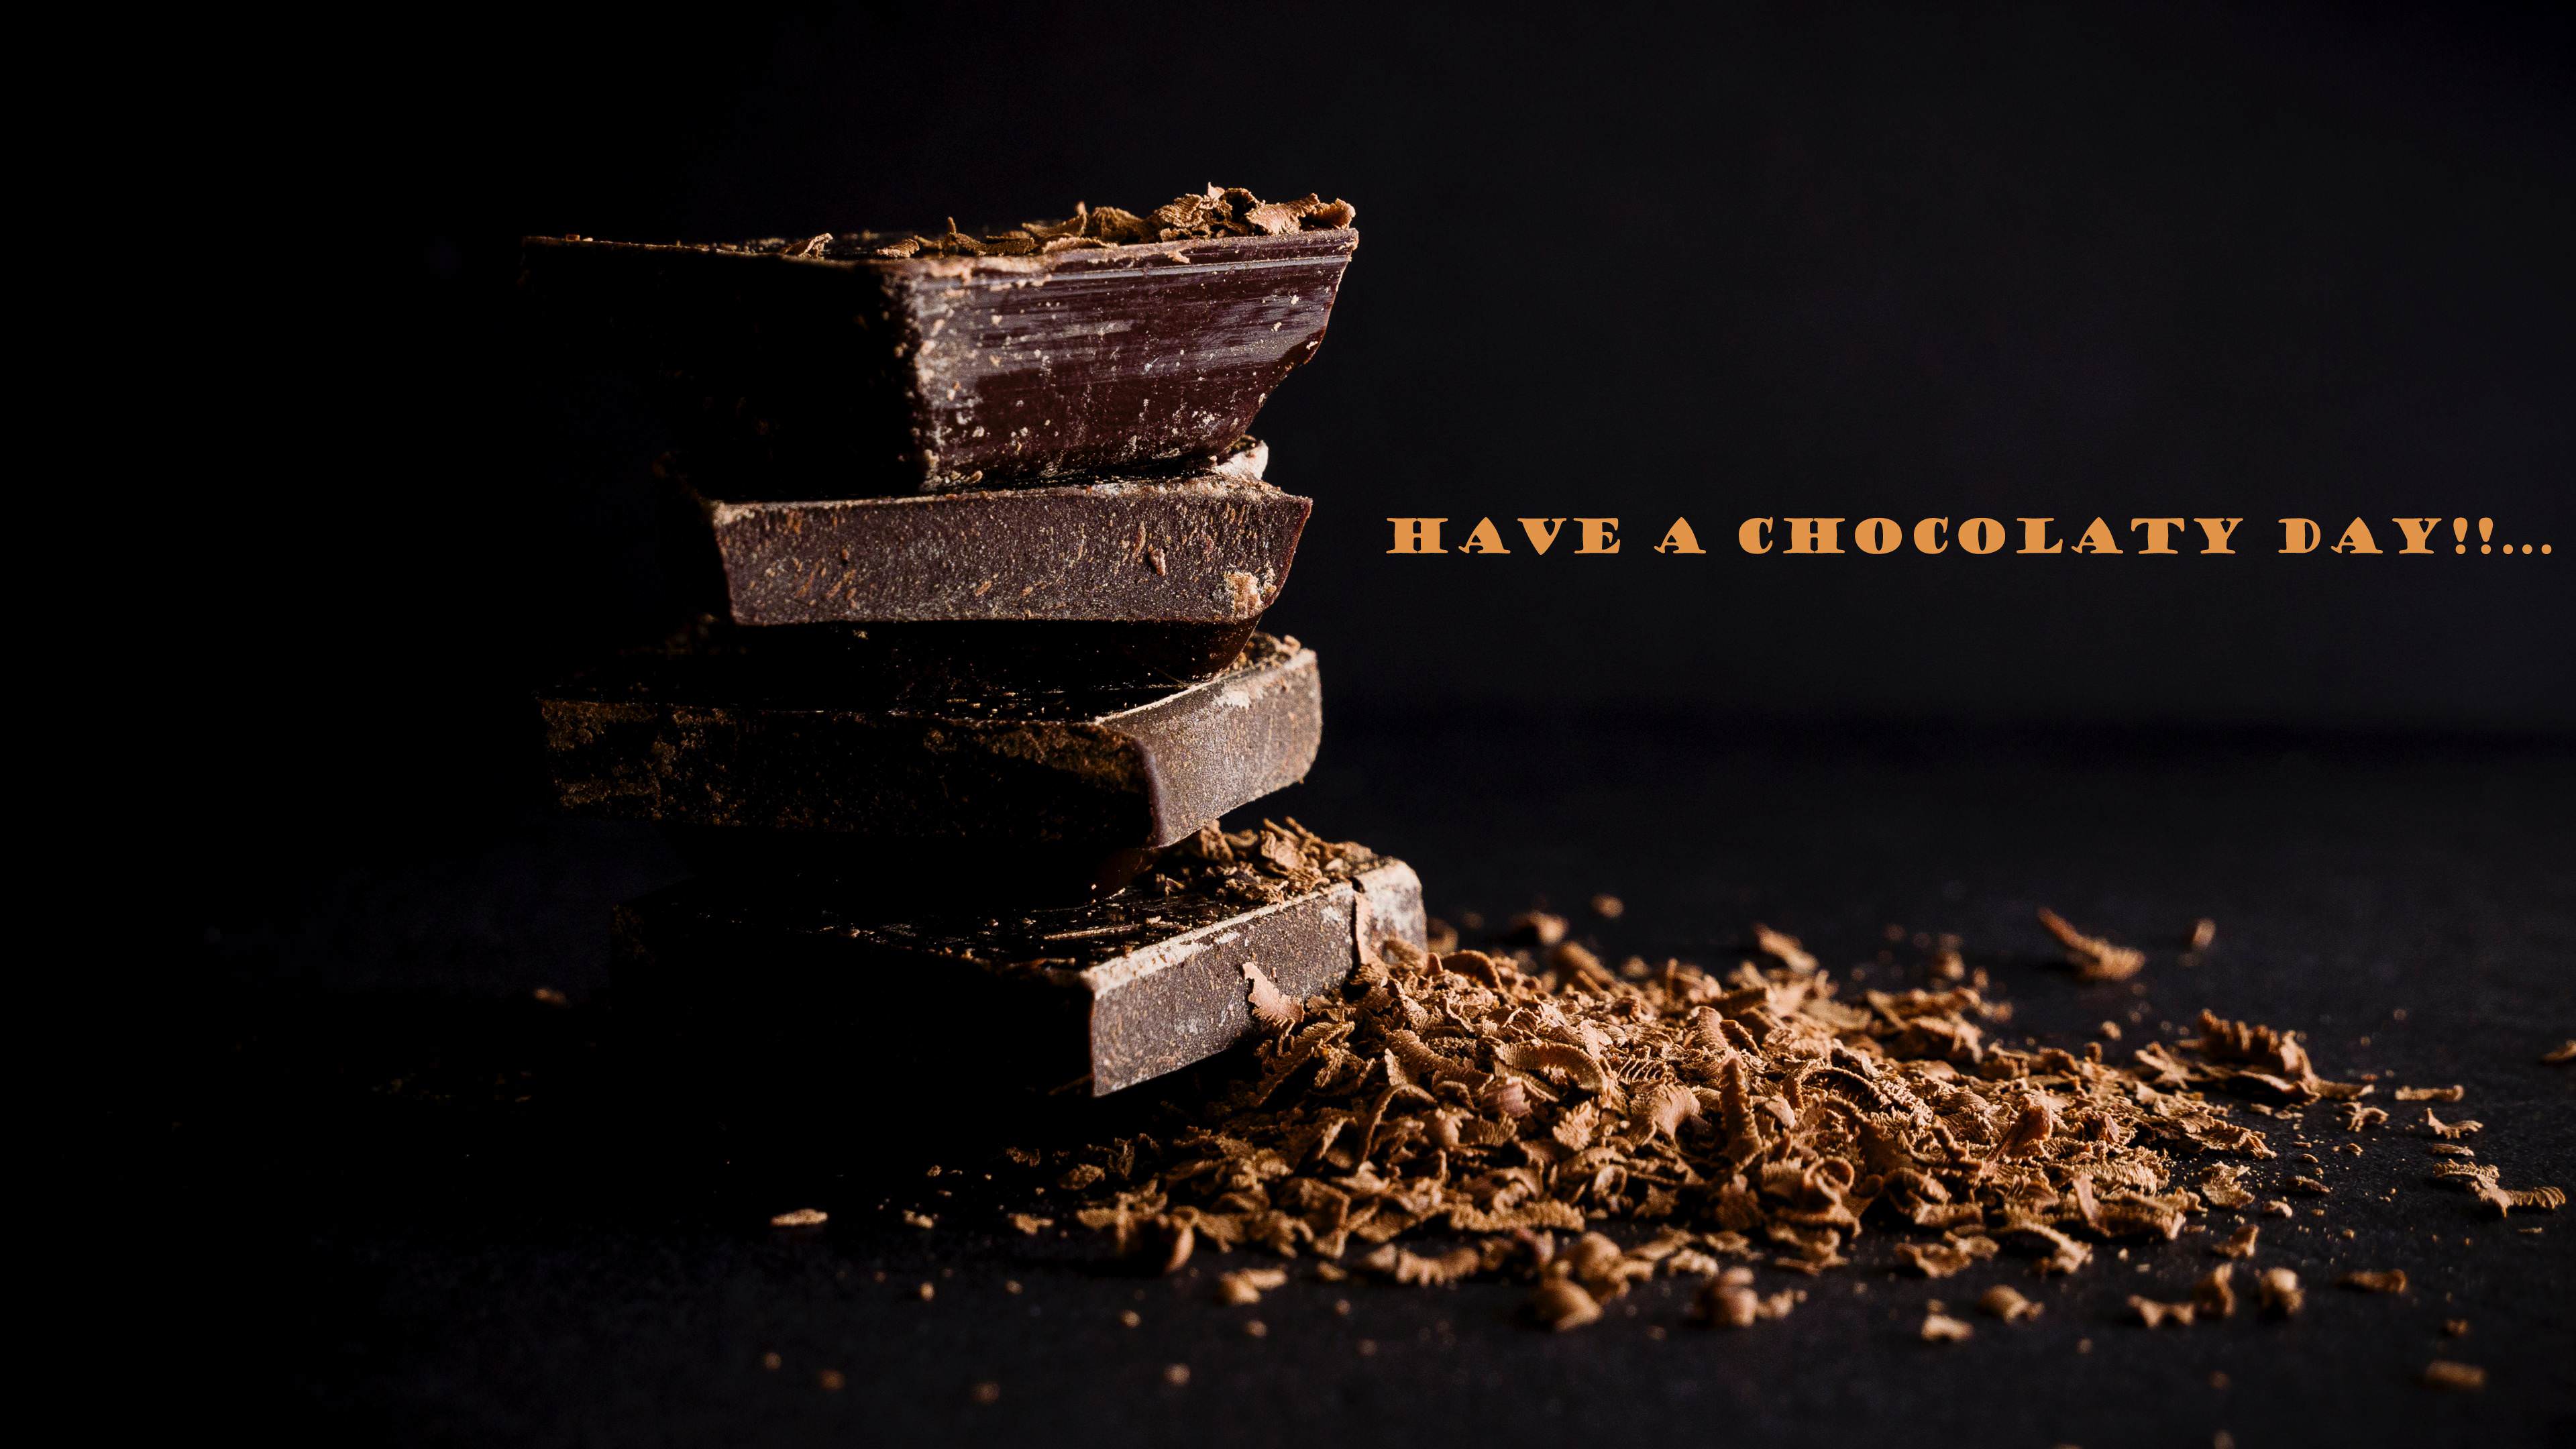 Chocolate day ultra HD 4k wallpaper Archives. Download Latest HD